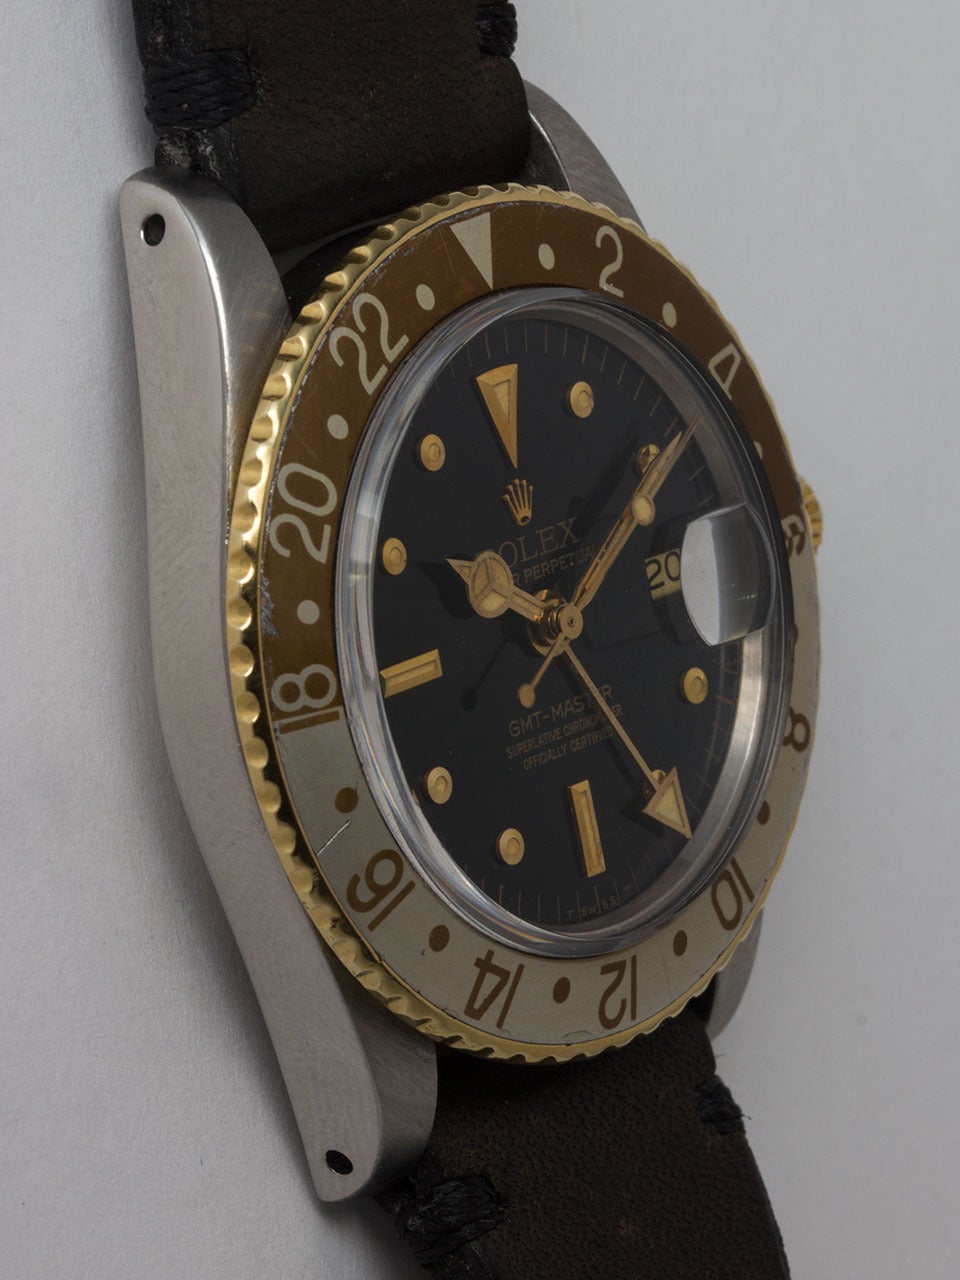 Rolex Stainless Steel and 14K Yellow Gold GMT-Master ref 1675 serial # 5.4 million circa 1978. 40mm case with 24 hour two tone bezel and gold crown. Very pleasing original glossy 